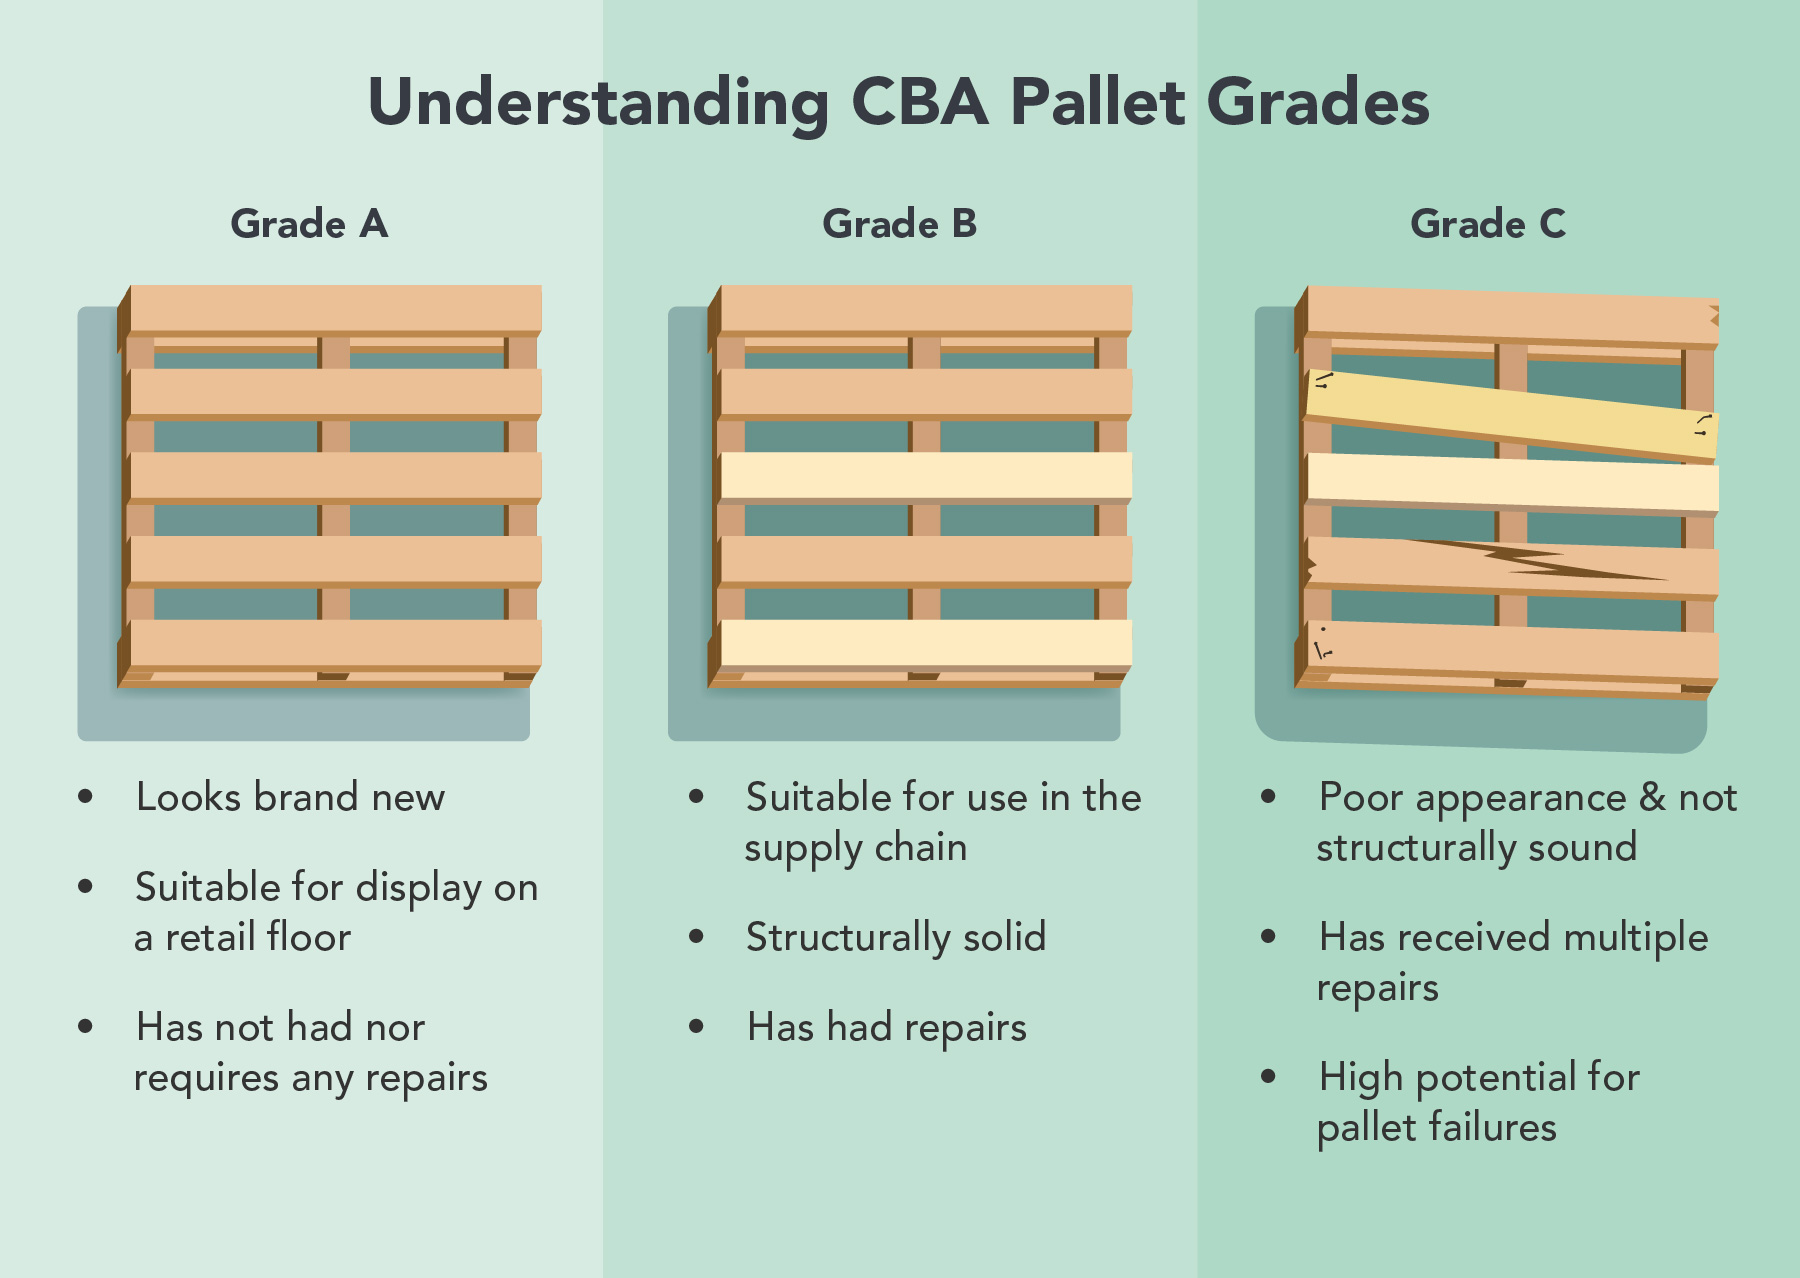 Graphic of CBA pallet Grades A, B, and C